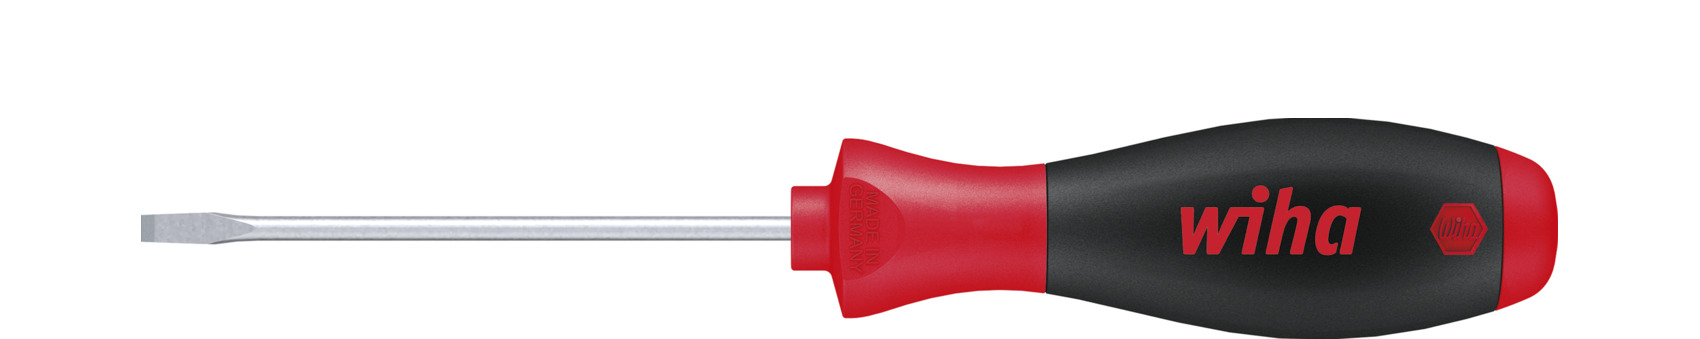 Wiha screwdrivers – individually or as a set for craftspeople